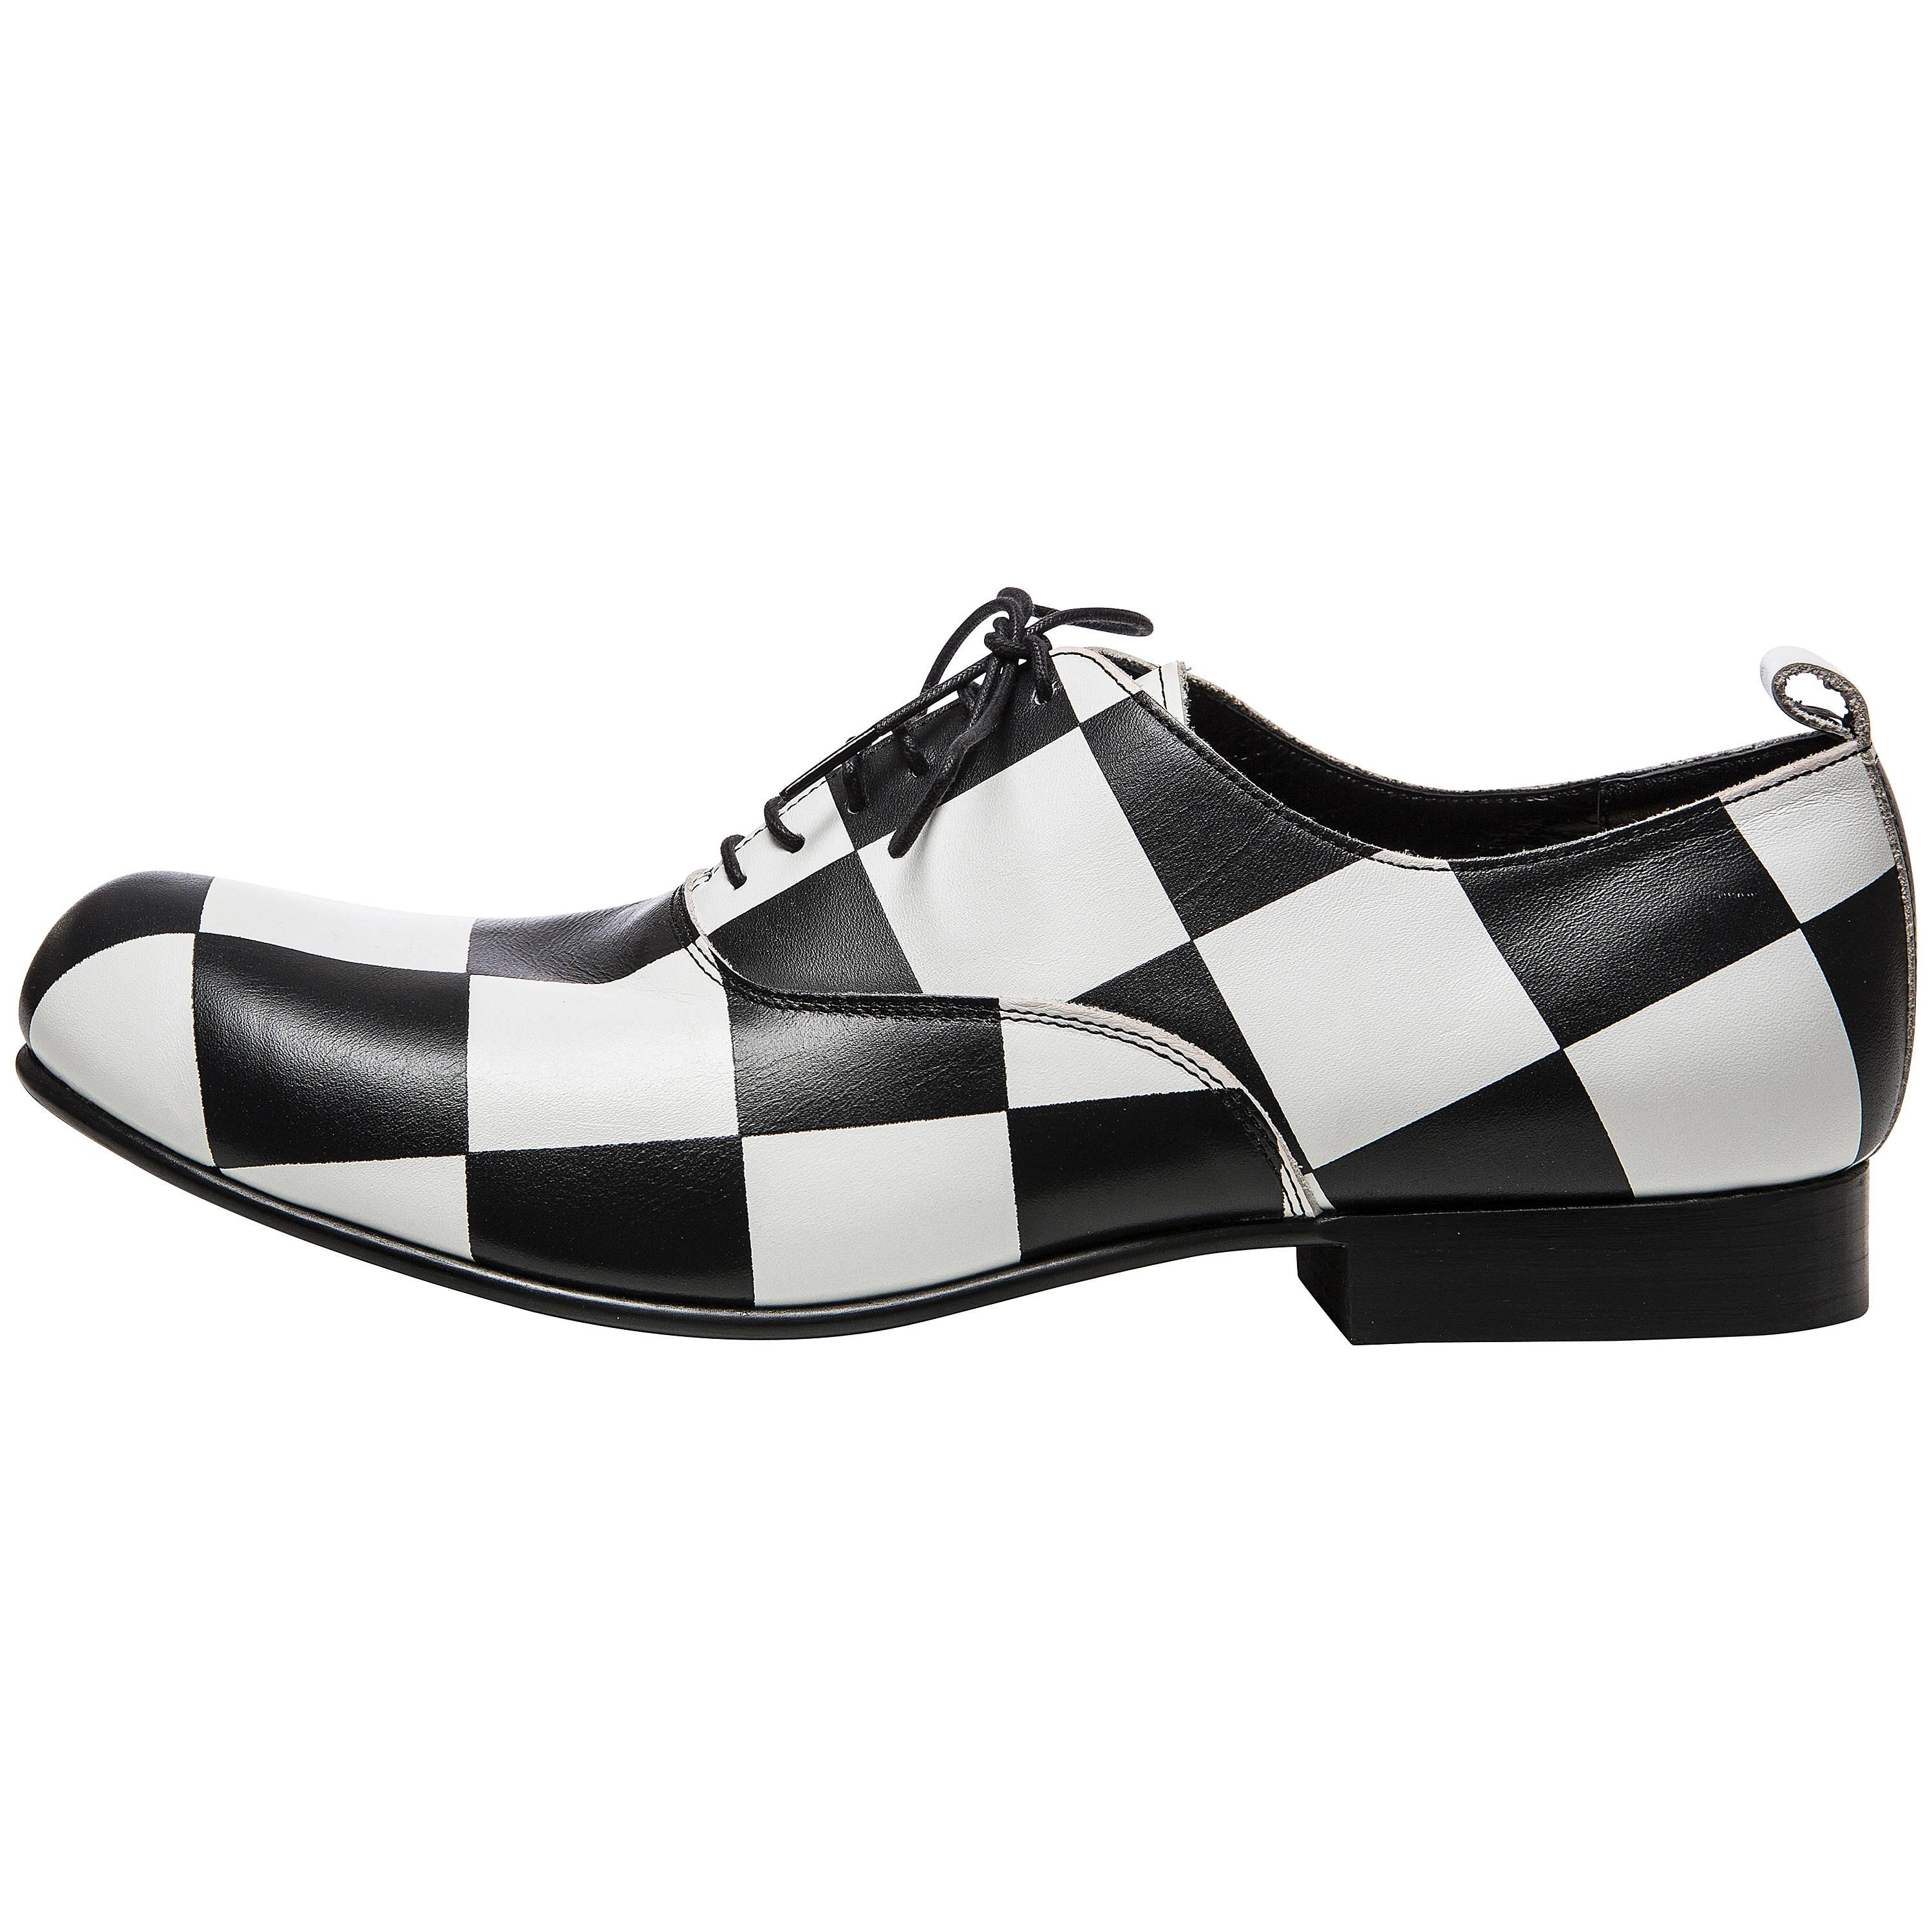 Comme des Garcons Men's Black and White Checkered Leather Shoes, Spring 2013